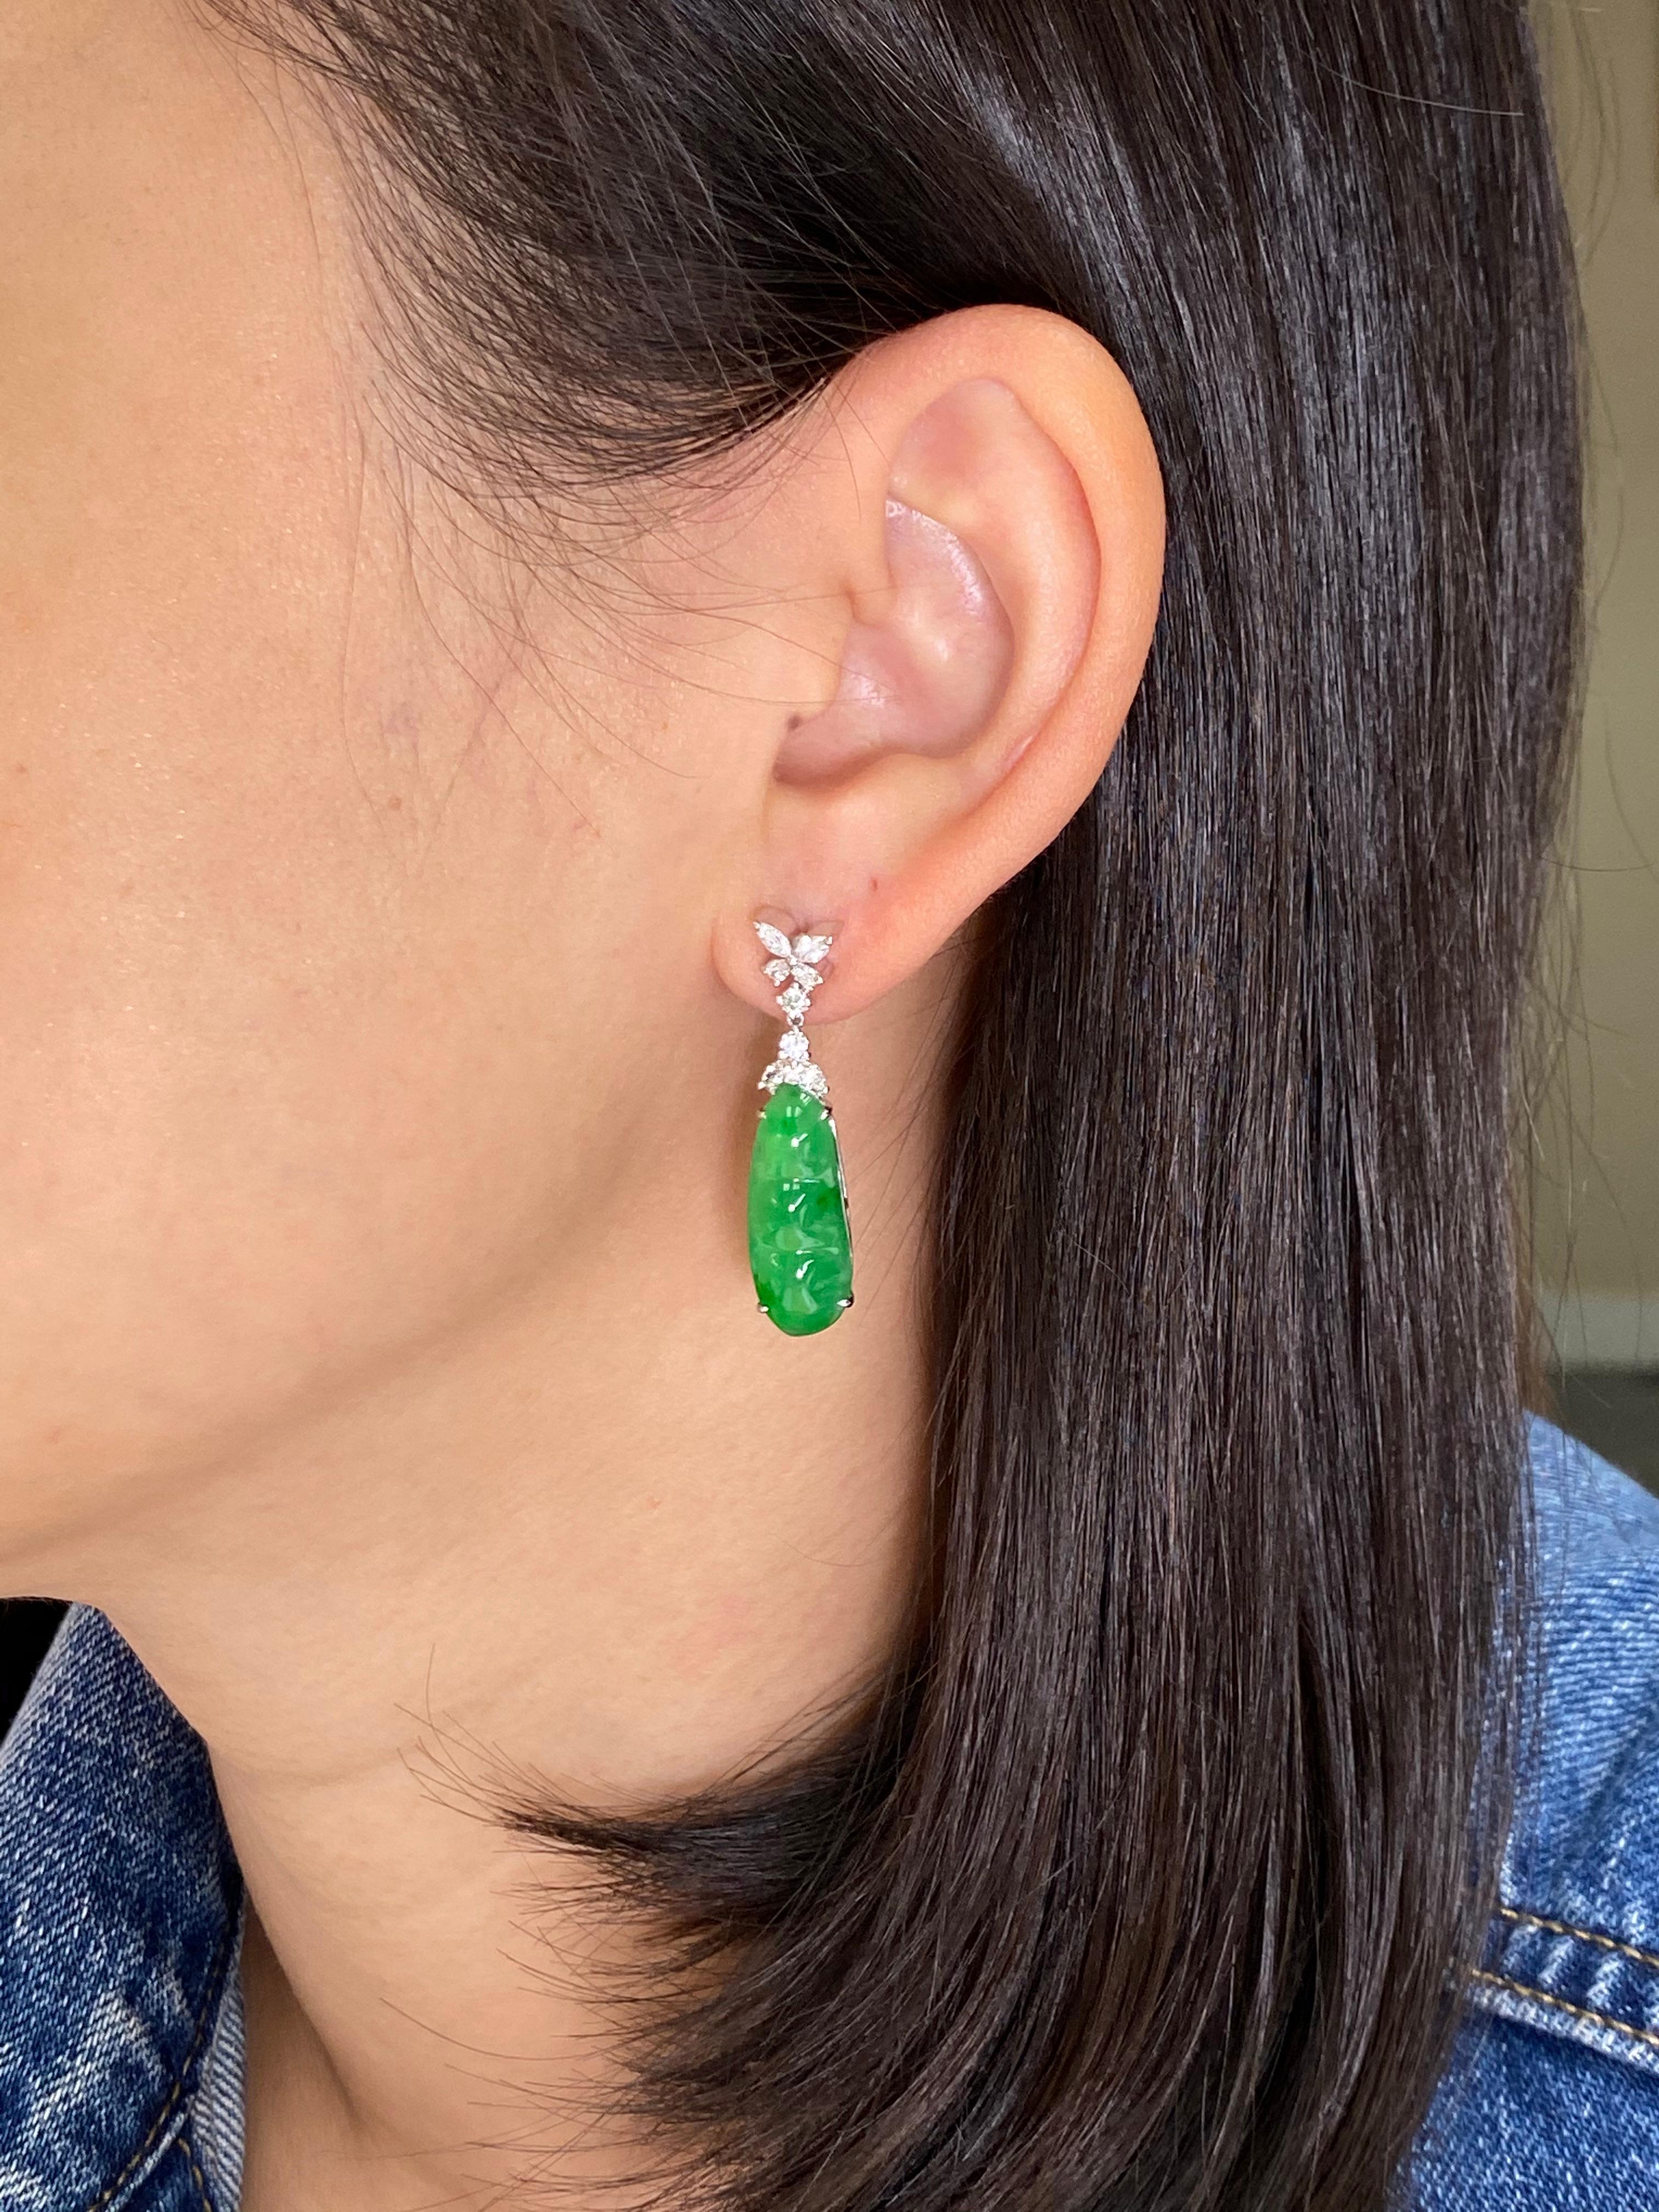 These icy jade apple green earrings are certified by 2 labs. Here is a nice pair of apple green icy Jadeite Jade earrings. The earrings are about 3.5 cm long and 0.8 cm wide each. The earrings are set in 18k white gold, and white diamonds. The 2